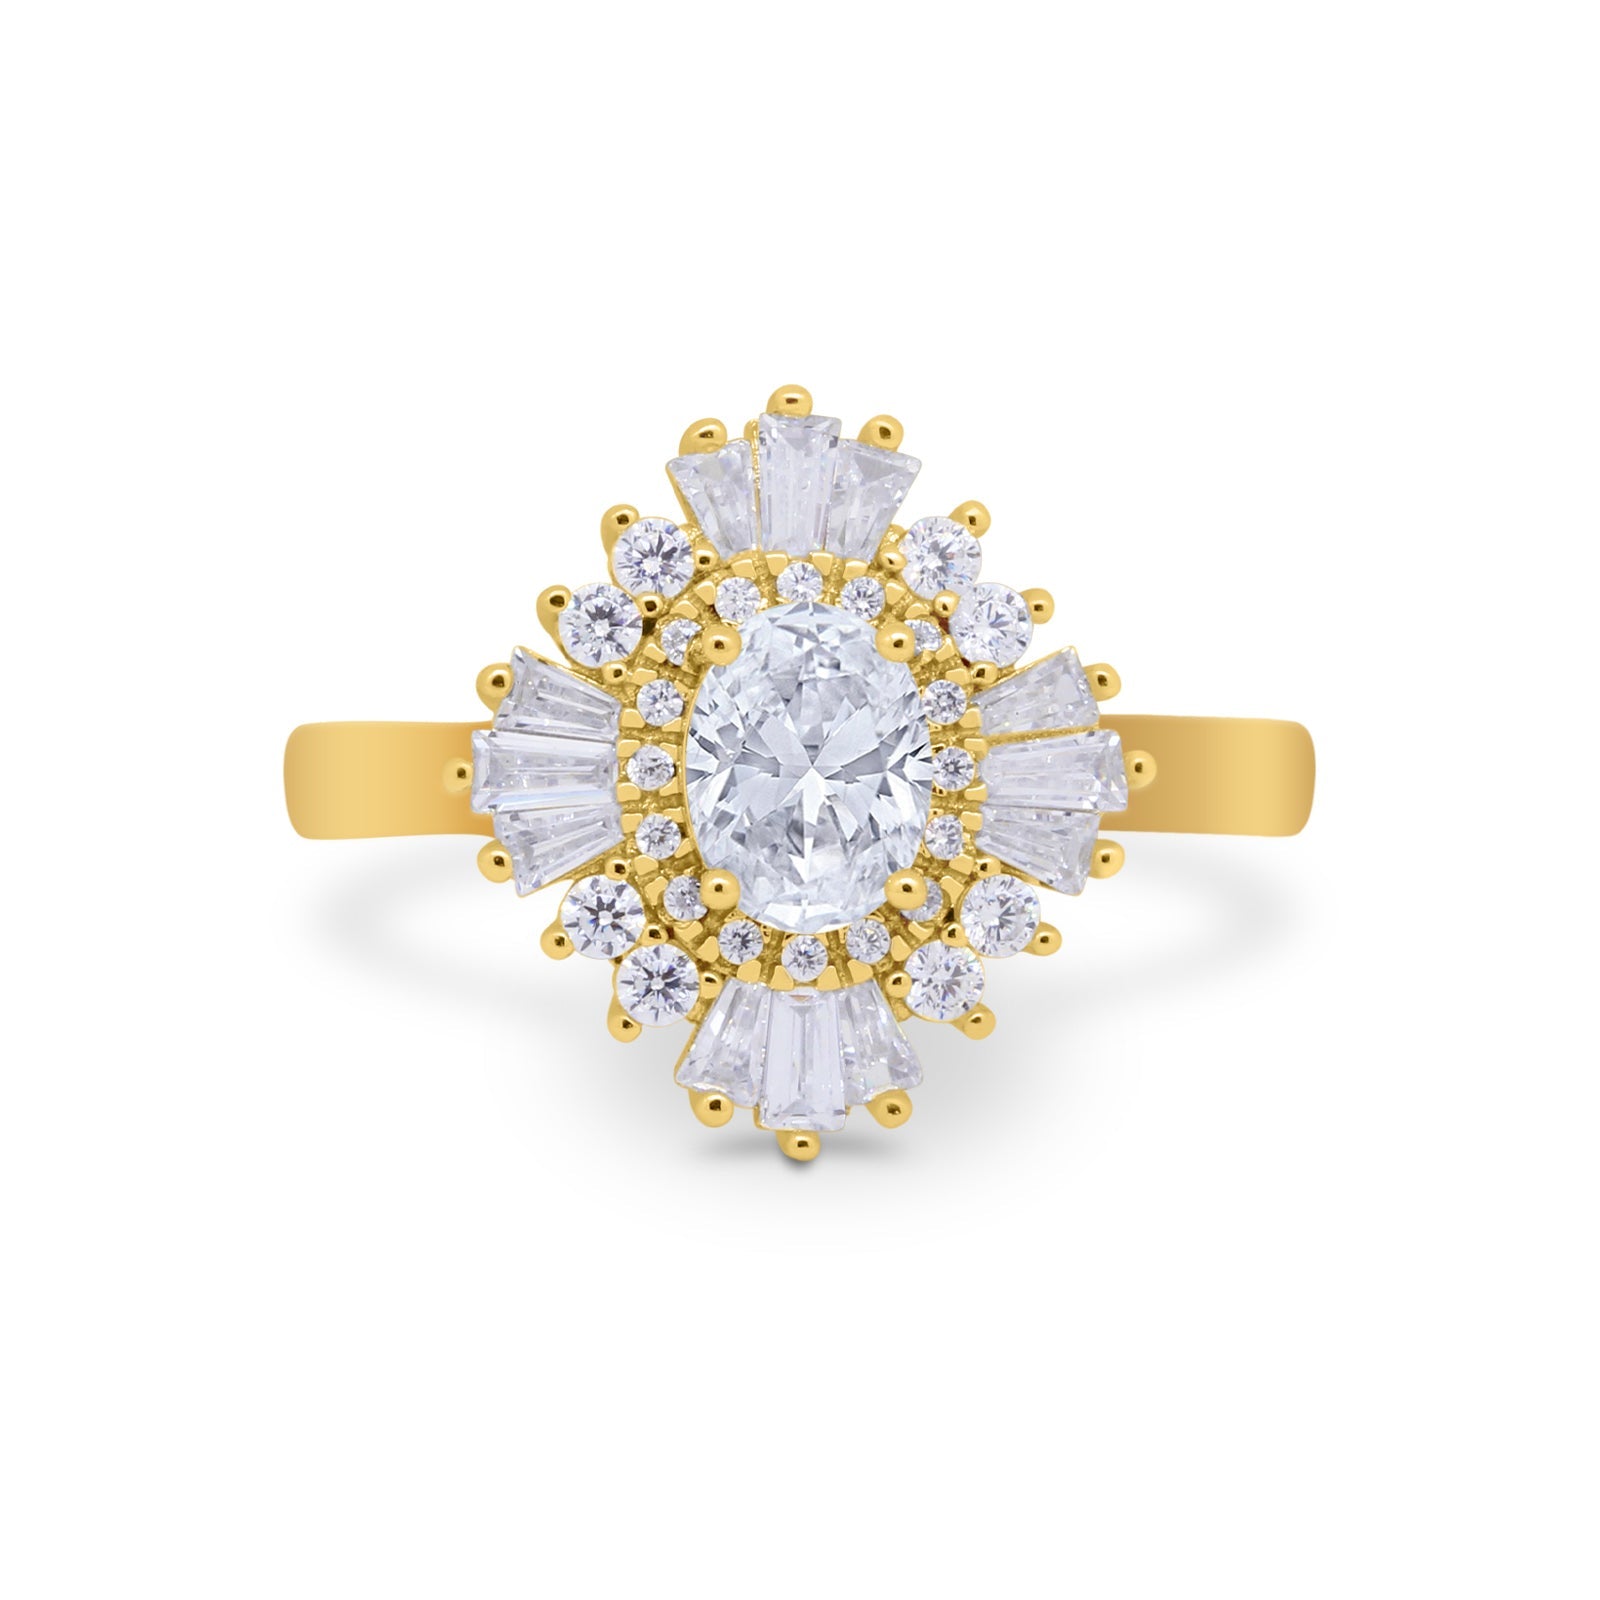 Art Deco Vintage Oval Halo Wedding Ring Yellow Tone, Simulated Cubic Zirconia 925 Sterling Silver